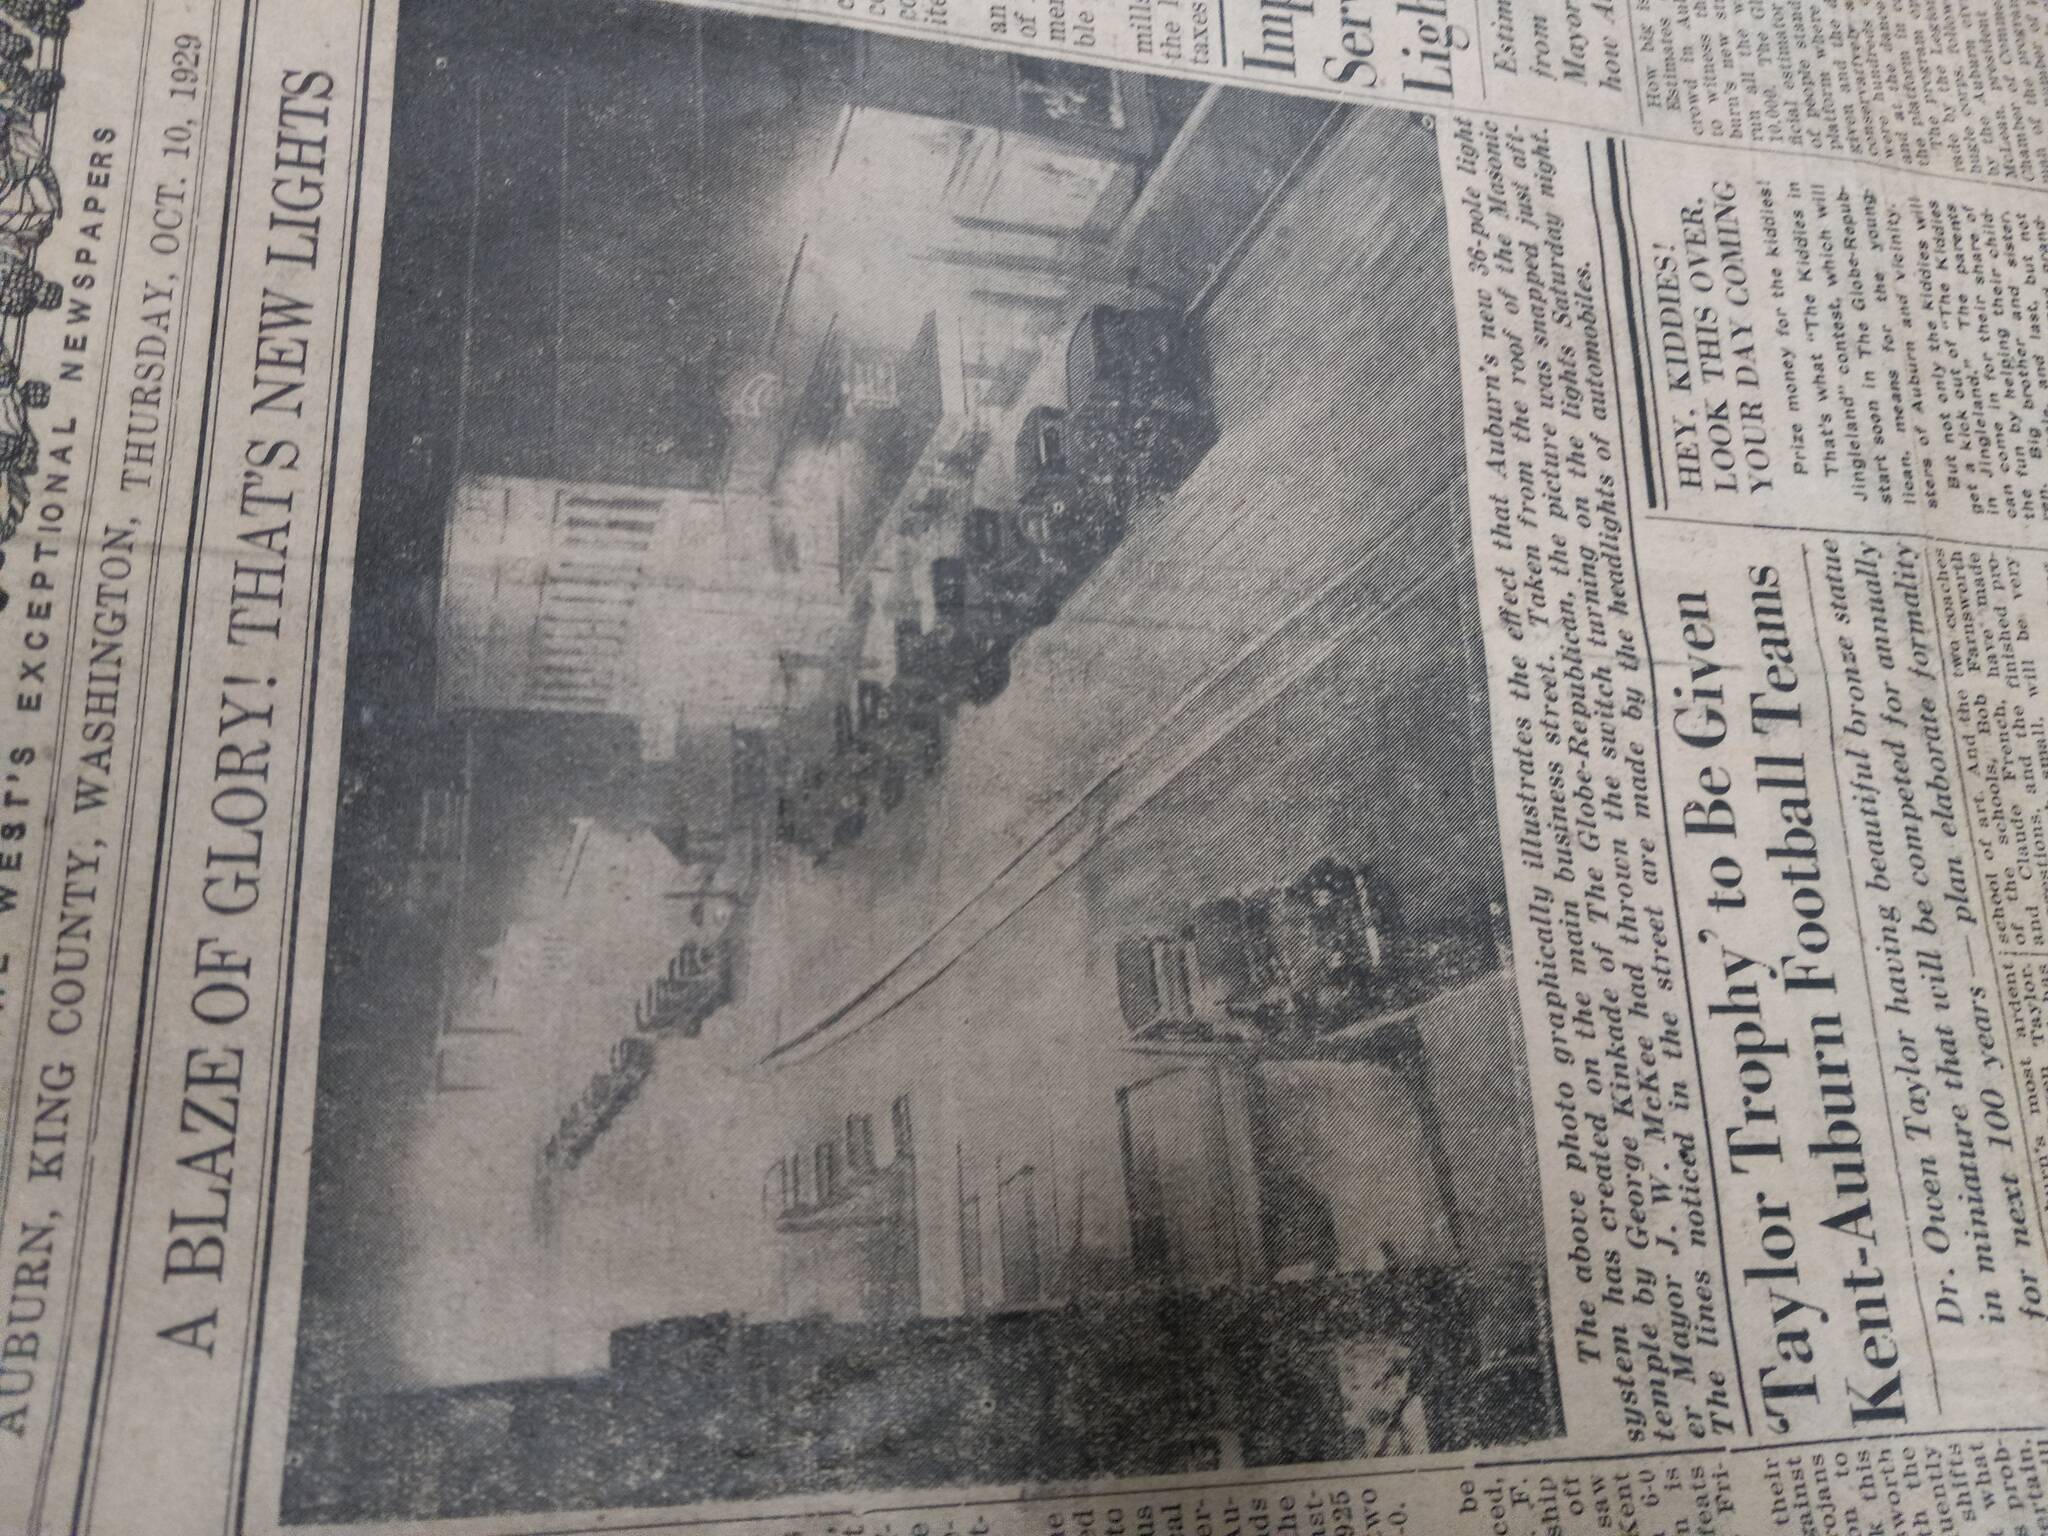 The front-page cover story in the Oct. 5, 1929 edition of the Auburn Globe Republican was all abuzz about the dedication two night’s previous of the city’s first ornamental lighting system in the downtown. Photo Courtesy White River Valley Museum.